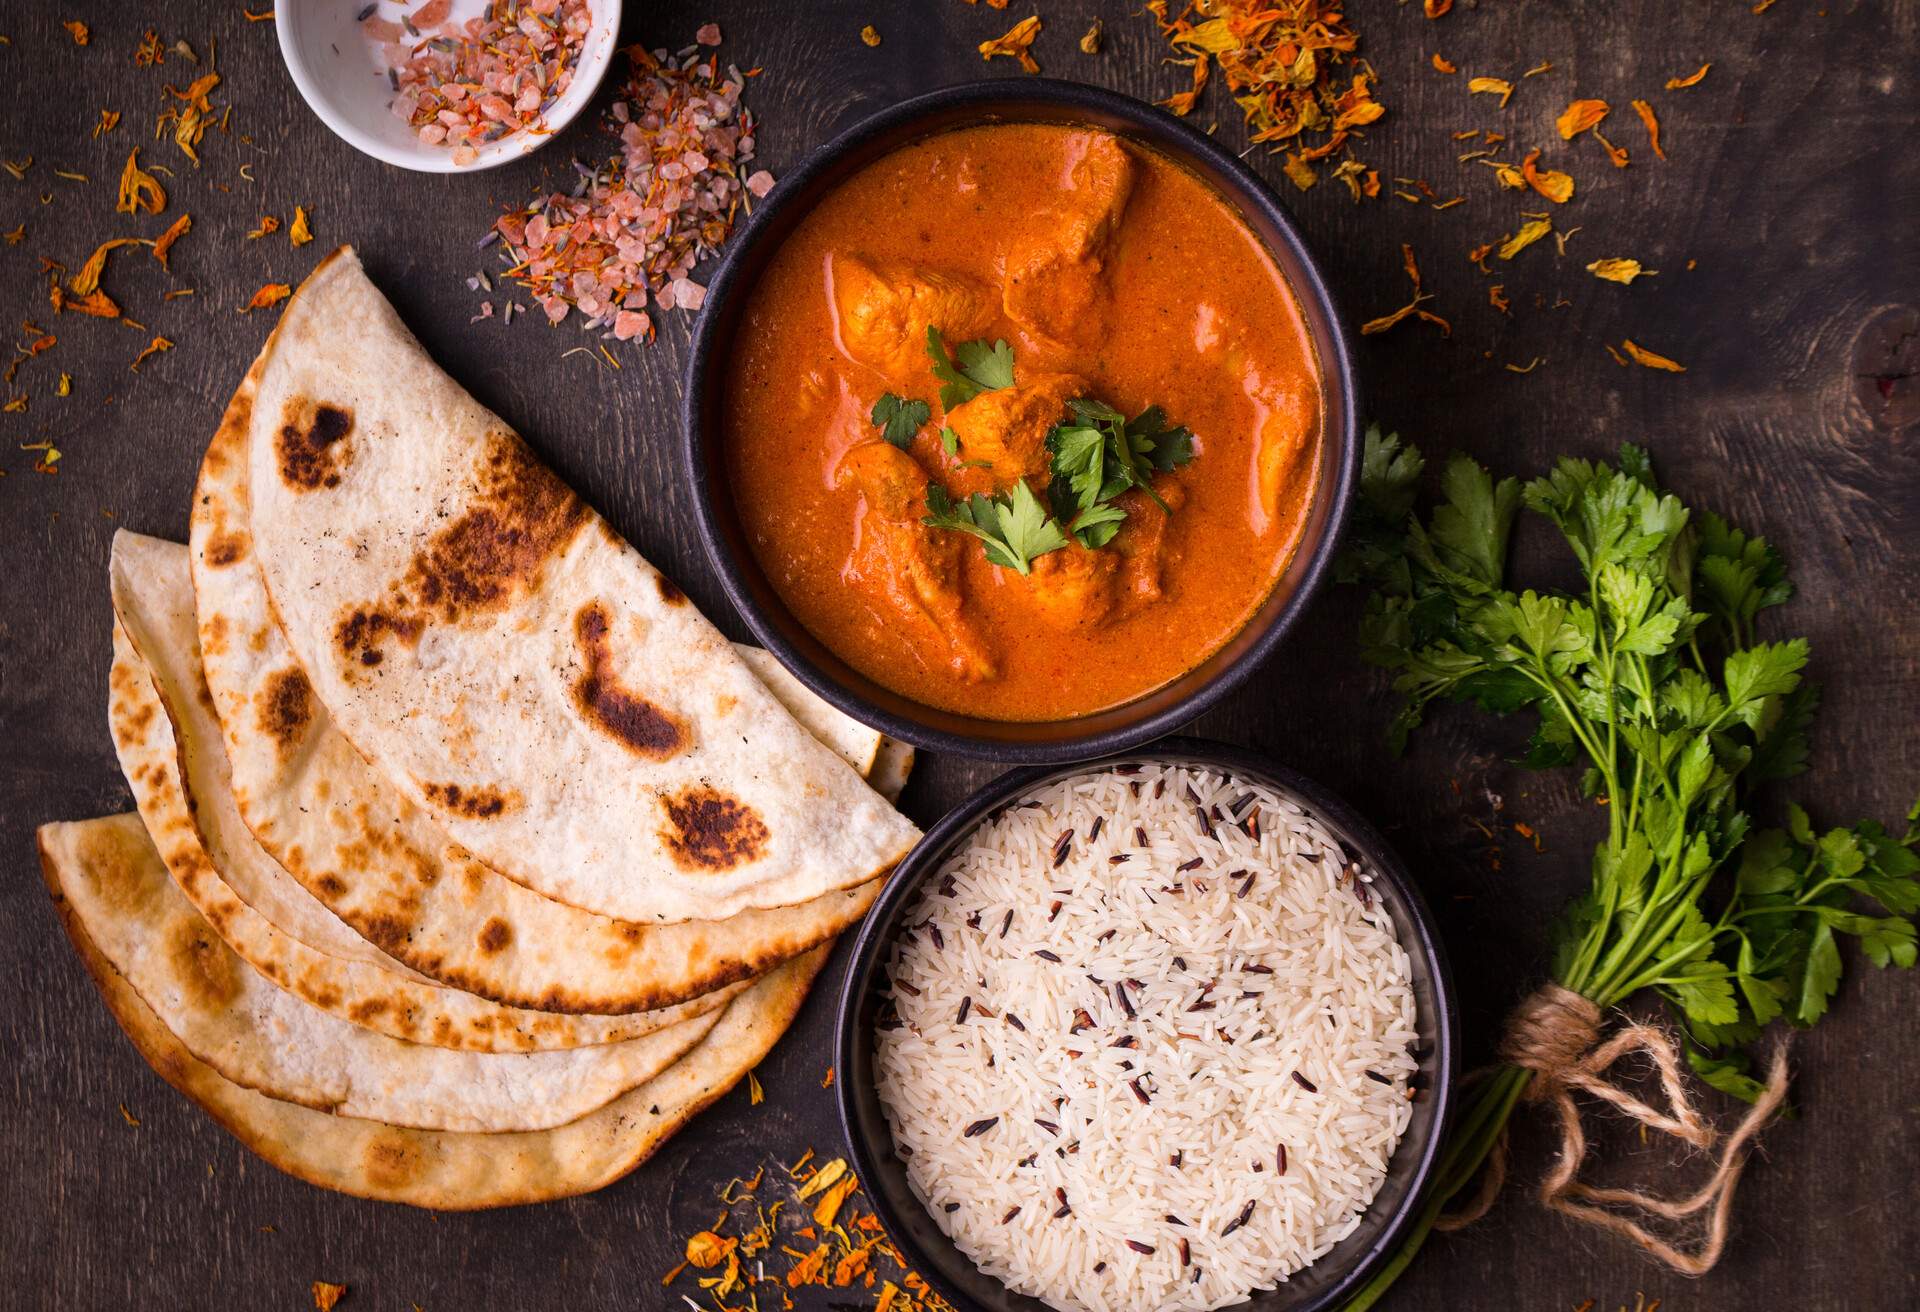 Hot spicy chicken tikka masala in bowl. Chicken curry with rice, indian naan butter bread, spices, herbs. Traditional Indian/British dish, popular indian curry in UK. Top view. Indian food. Close-up ; Shutterstock ID 594029894; Purpose: Campaign Ad; Brand (KAYAK, Momondo, Any): OpenTable